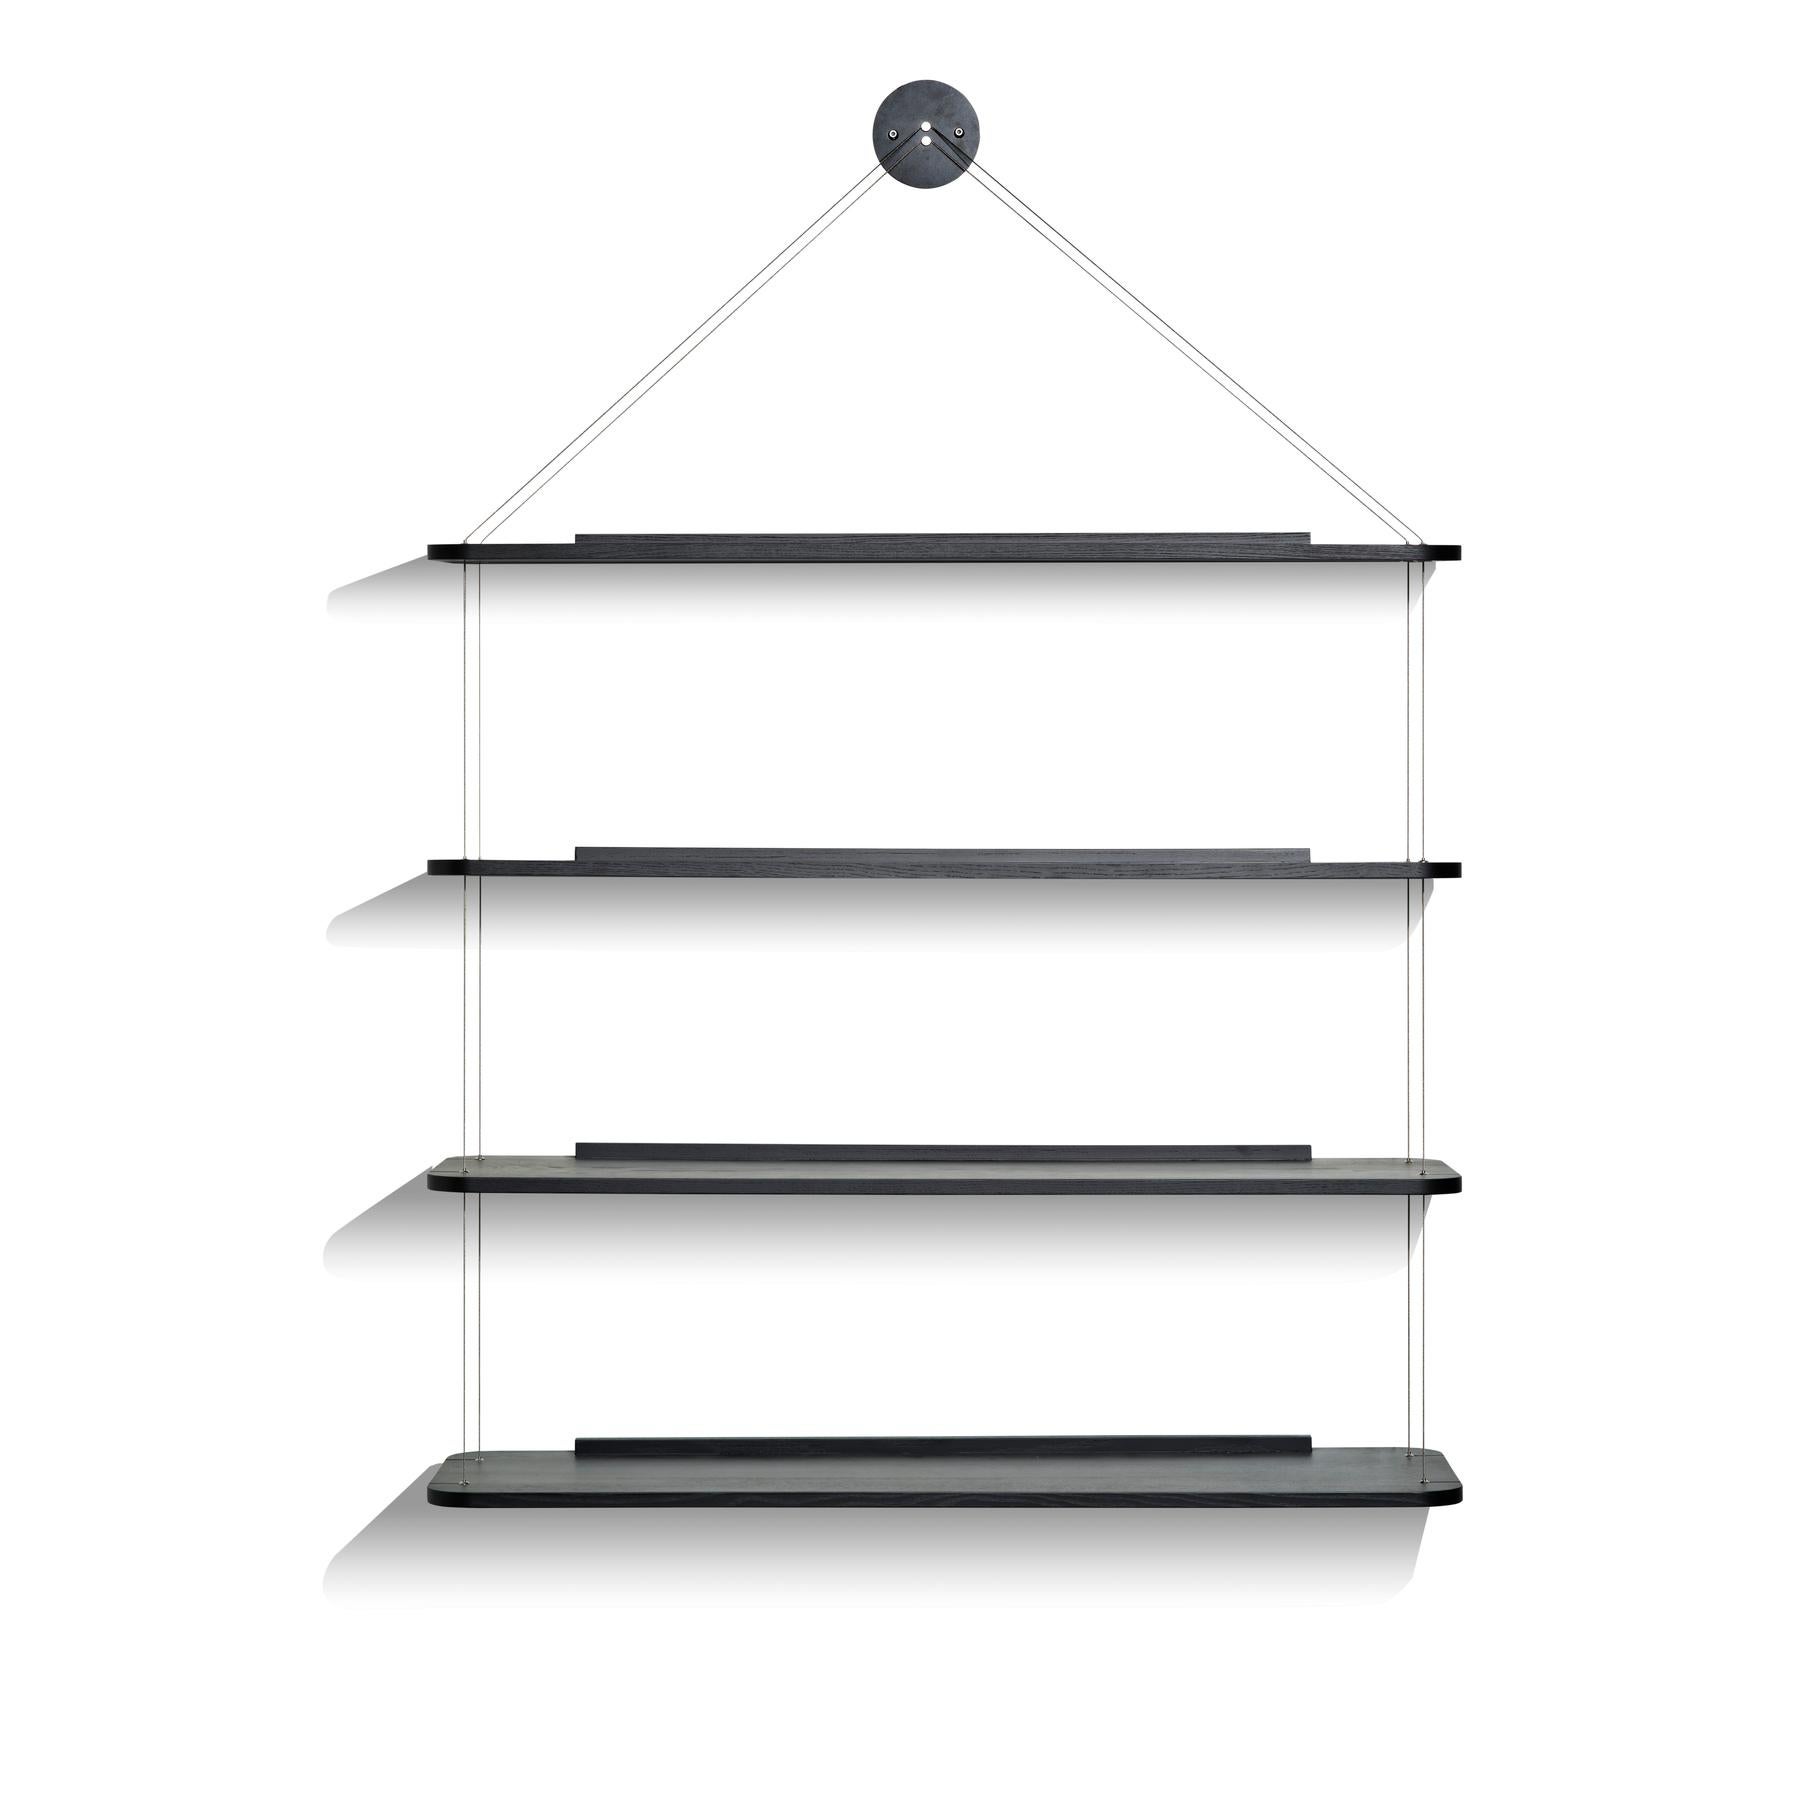 Shelve designed by Achille Castiglioni and Pier Giacomo Castiglioni in 1957. 

Originally designed in 1957, perfected over the years, and produced by Bernini in 1966. Seeking to pare down the structure of a bookcase to the absolute minimum,